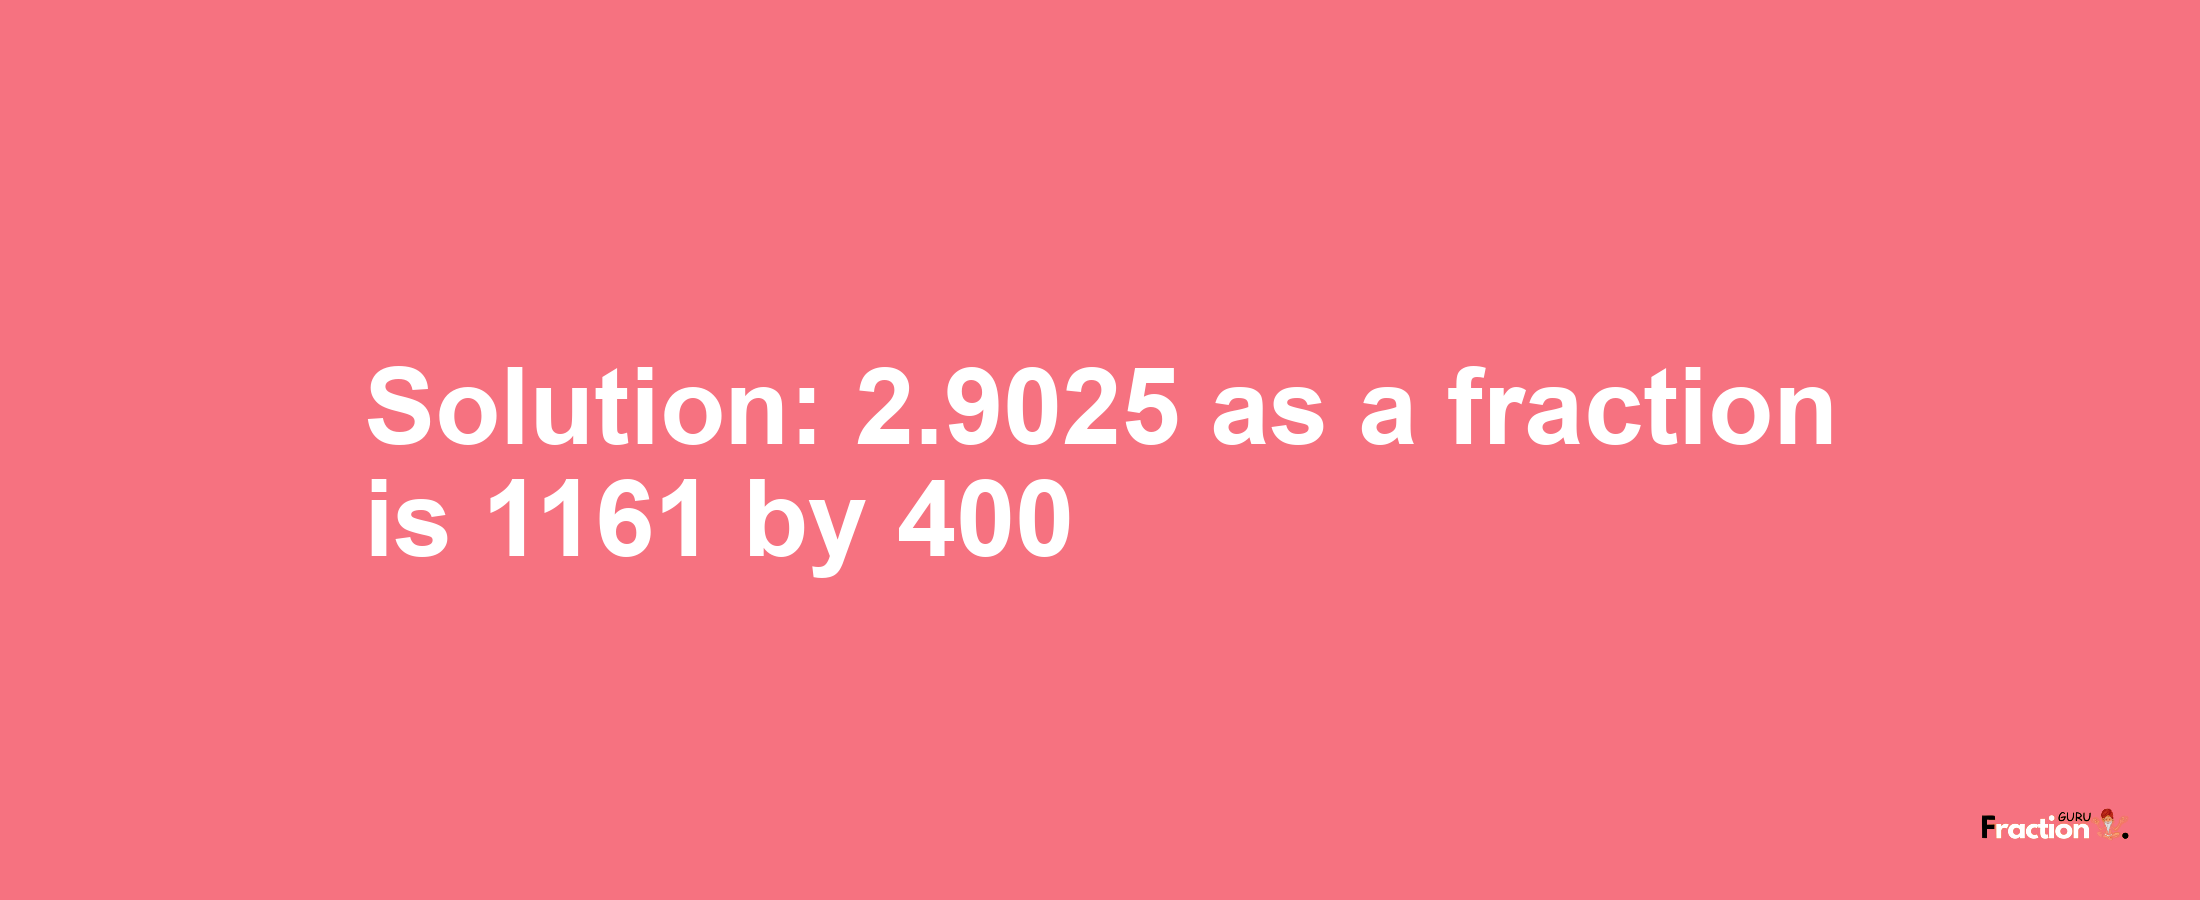 Solution:2.9025 as a fraction is 1161/400